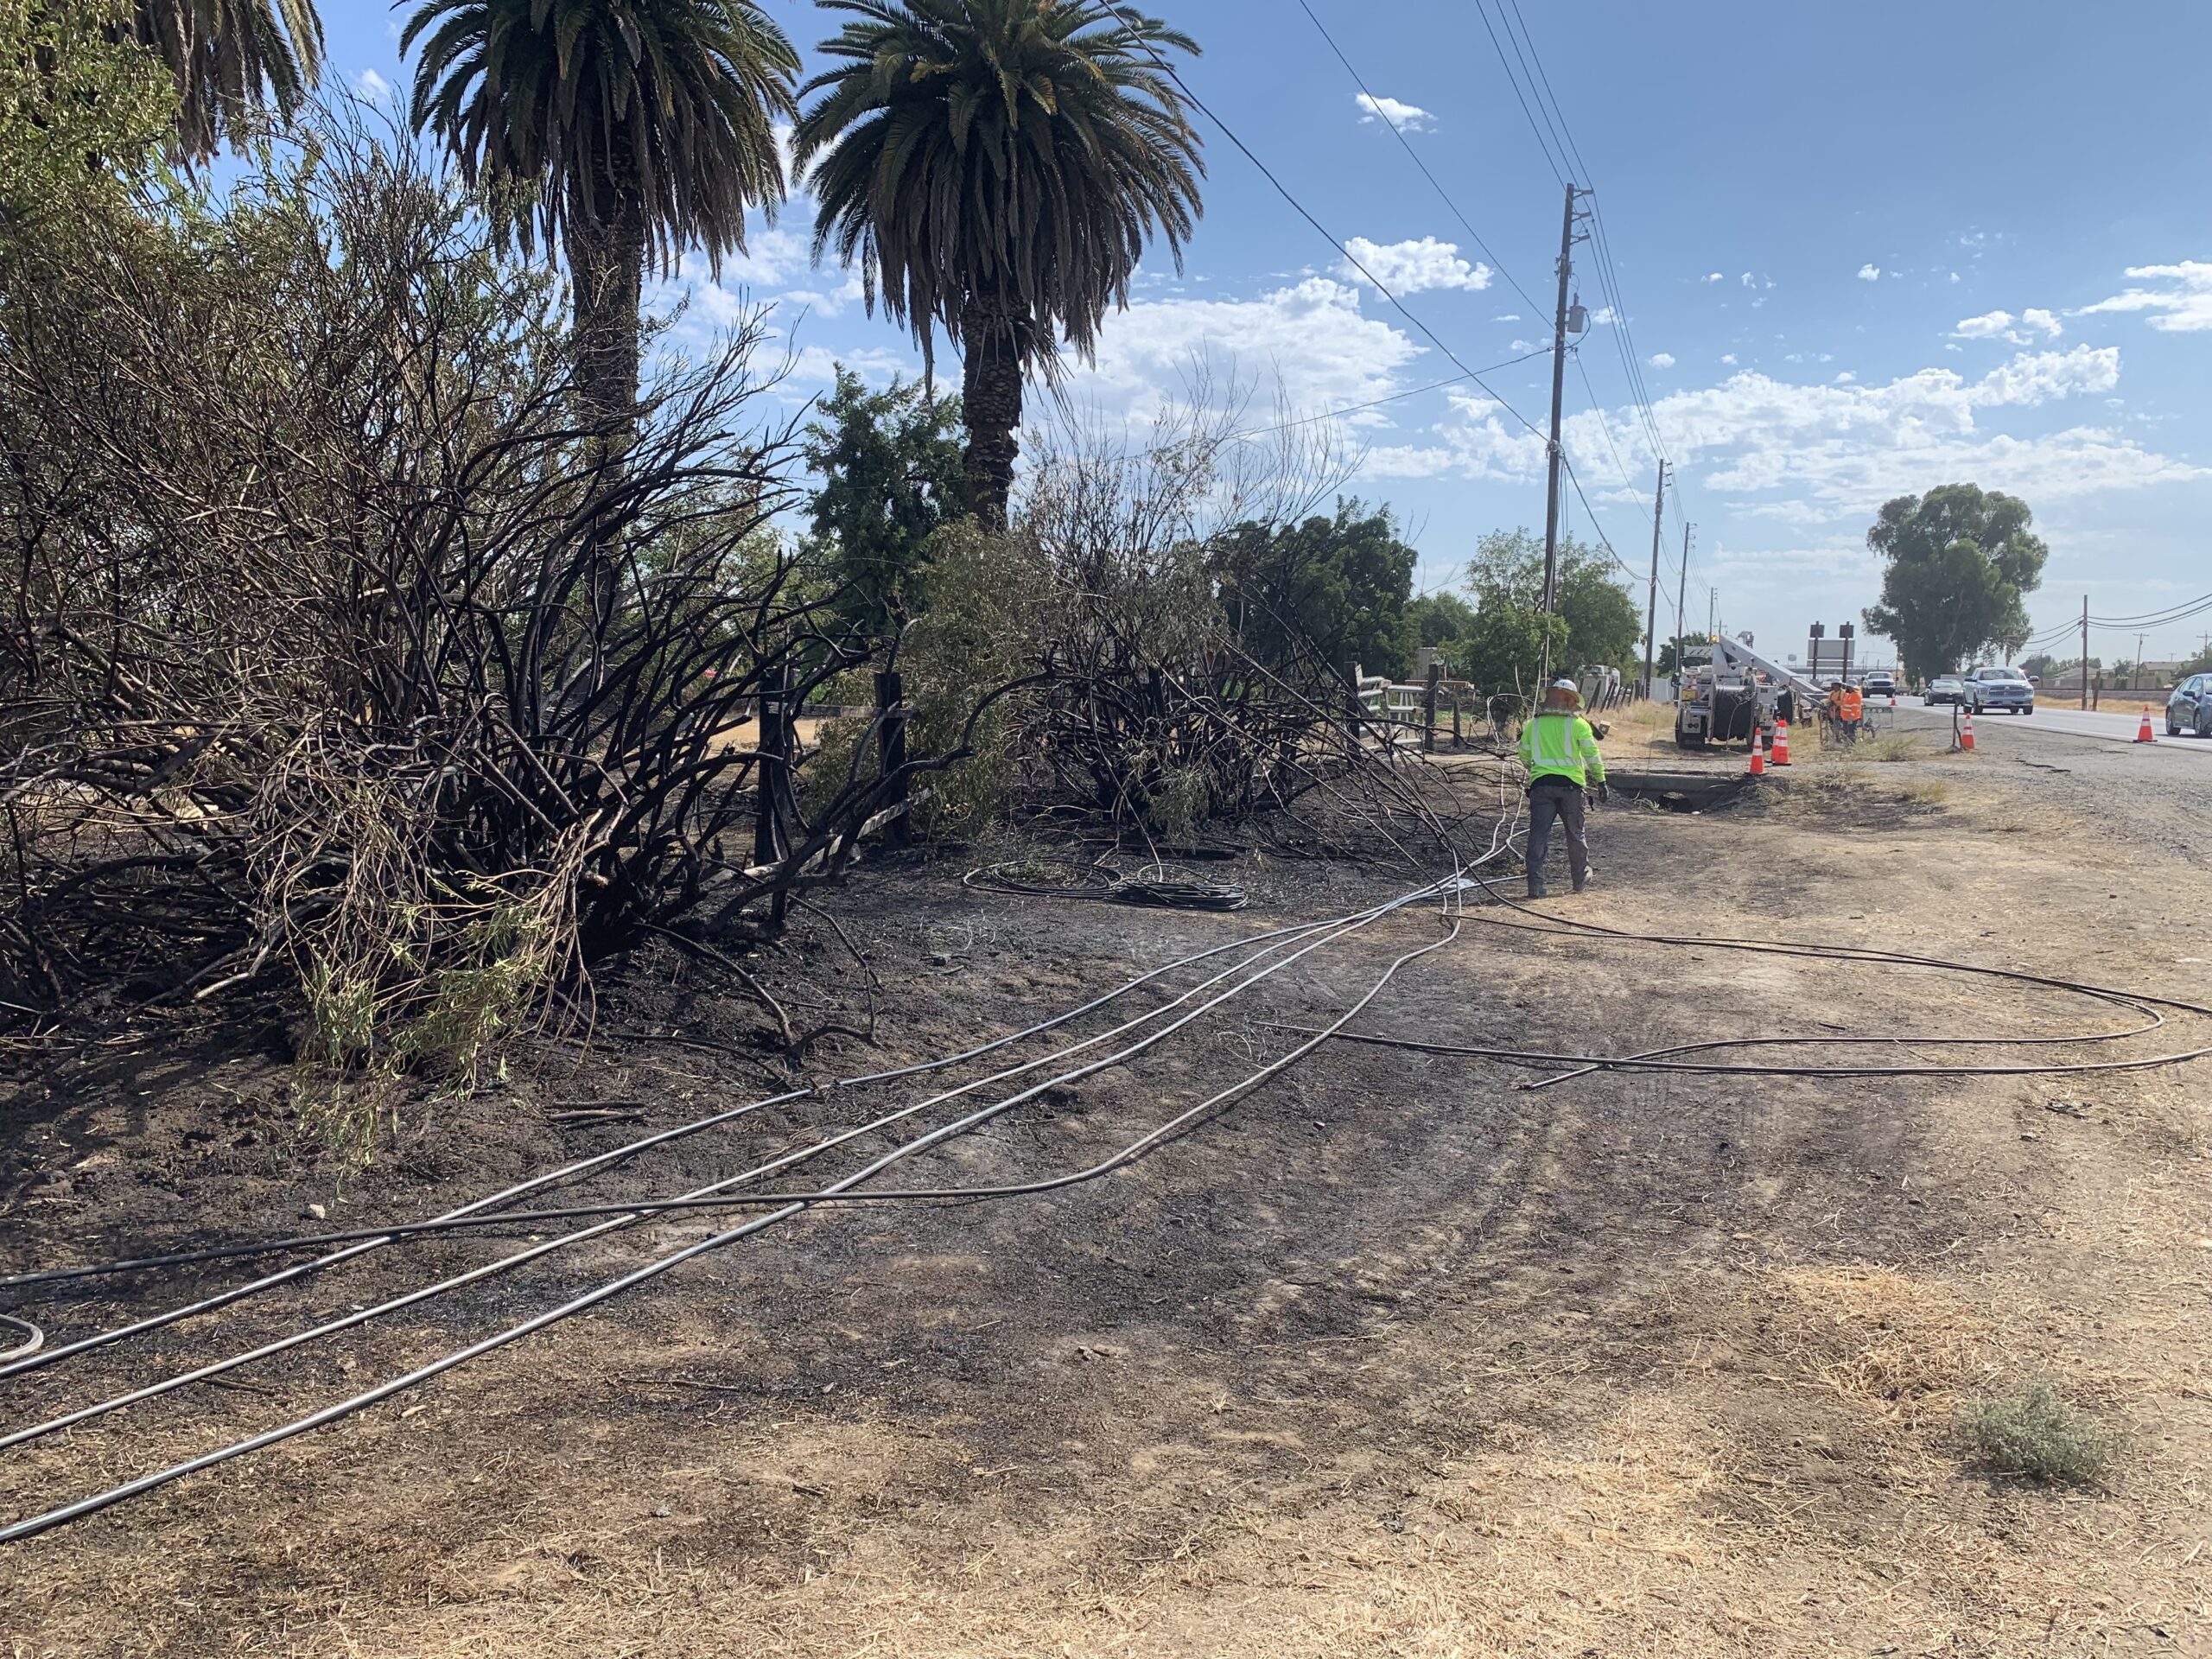 Comcast Works Diligently to Restore Services Following Fire Damage in Merced, CA